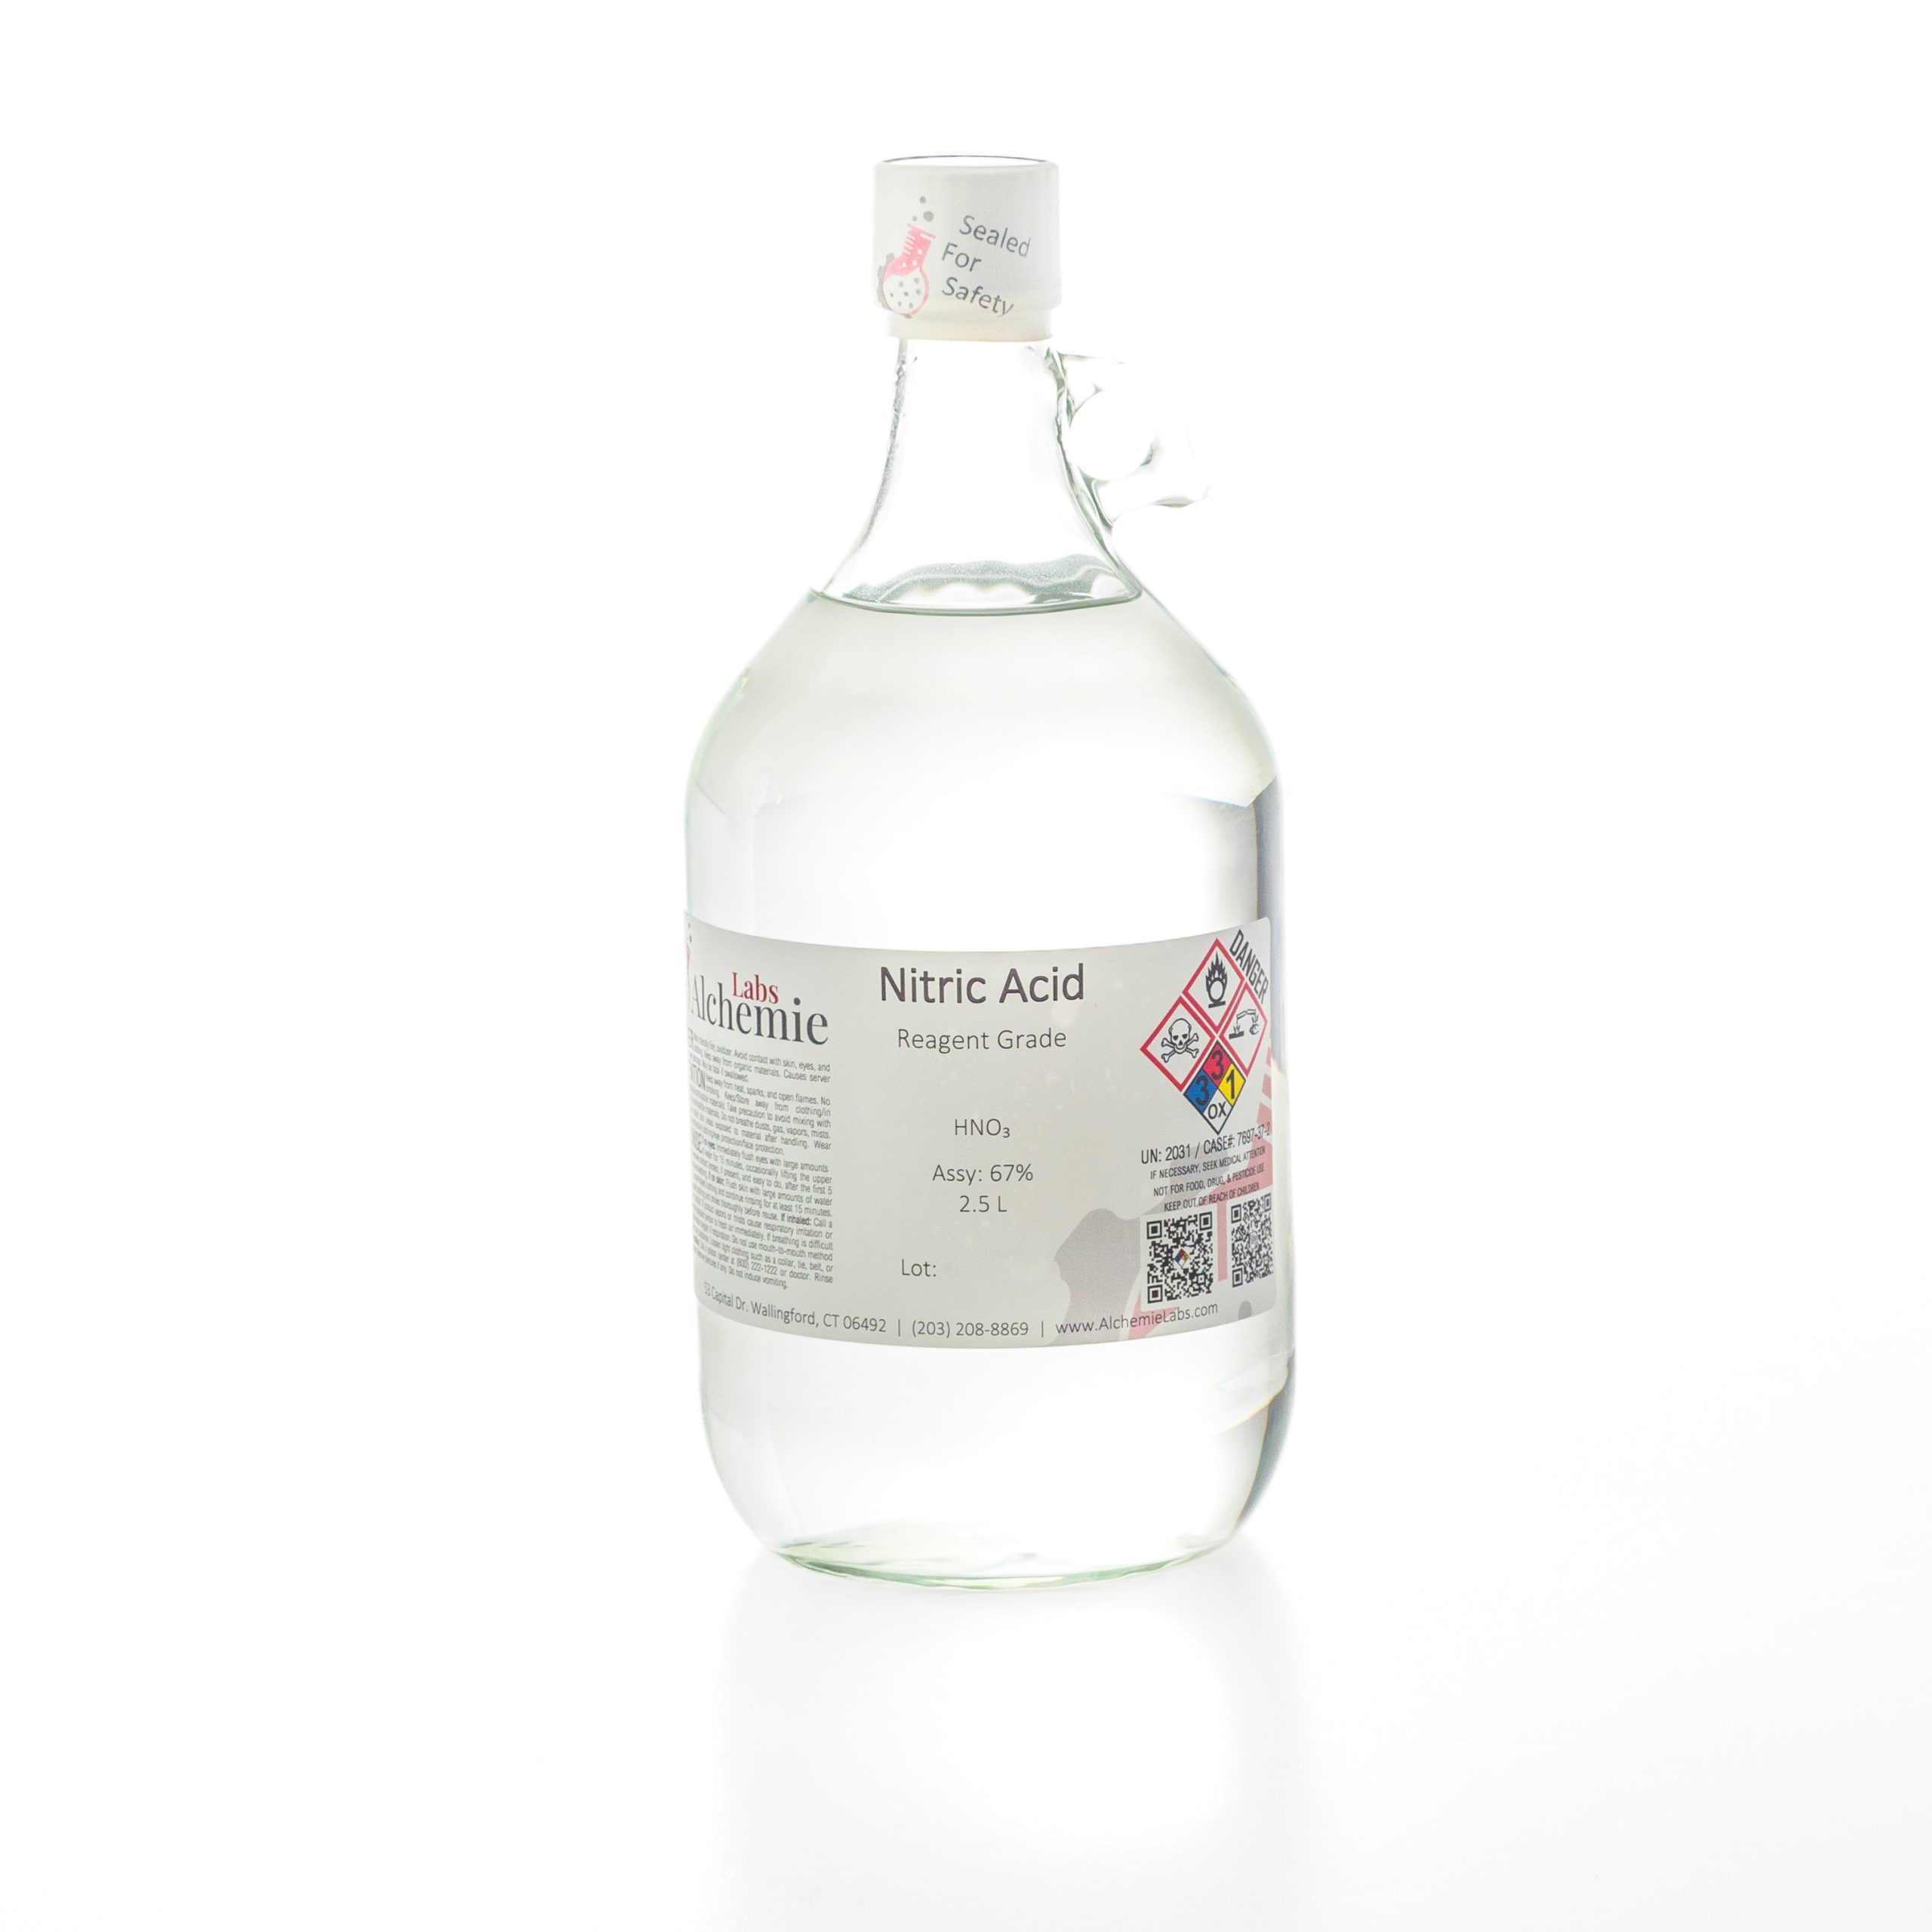 2.5L bottle of reagent grade nitric acid by Alchemie Labs, with safety seal and chemical information on the label.